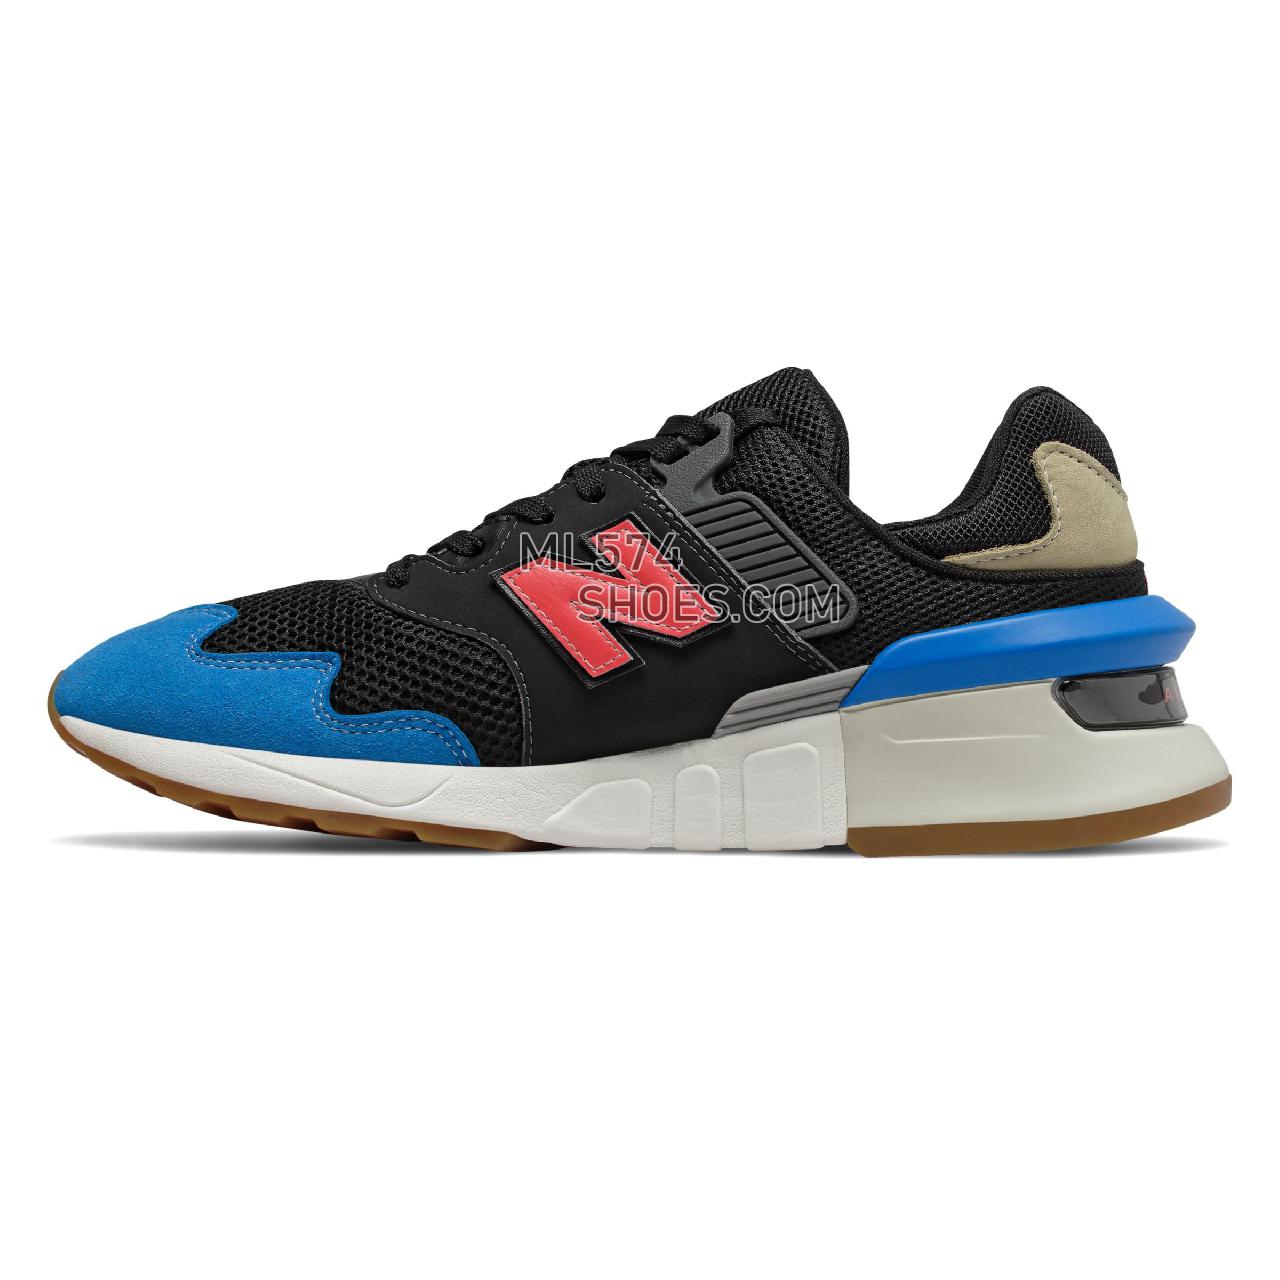 New Balance 997 Sport - Men's Sport Style Sneakers - Black with Neo Classic Blue - MS997JHZ